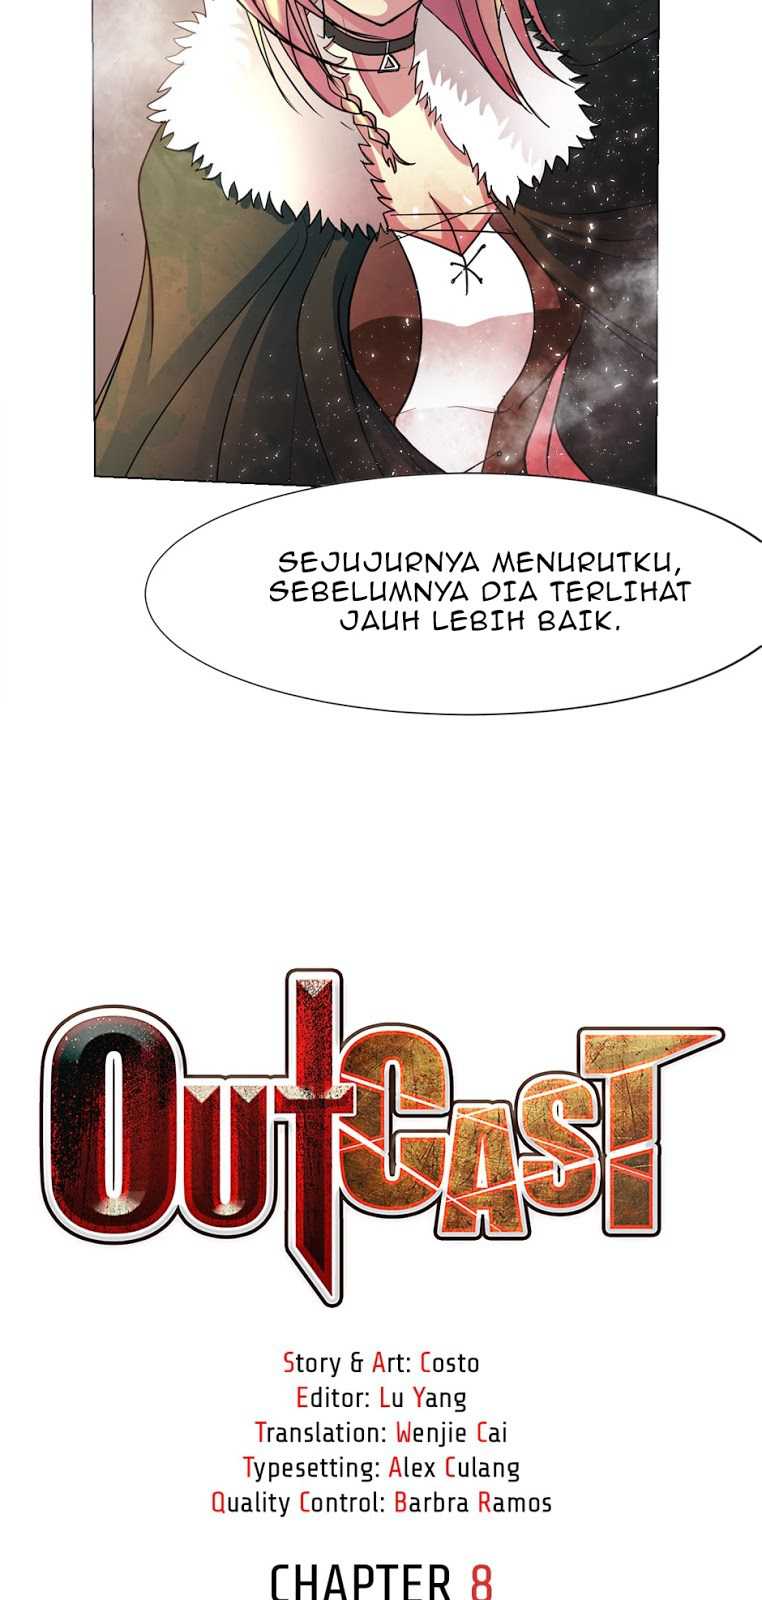 Outcast Chapter 8